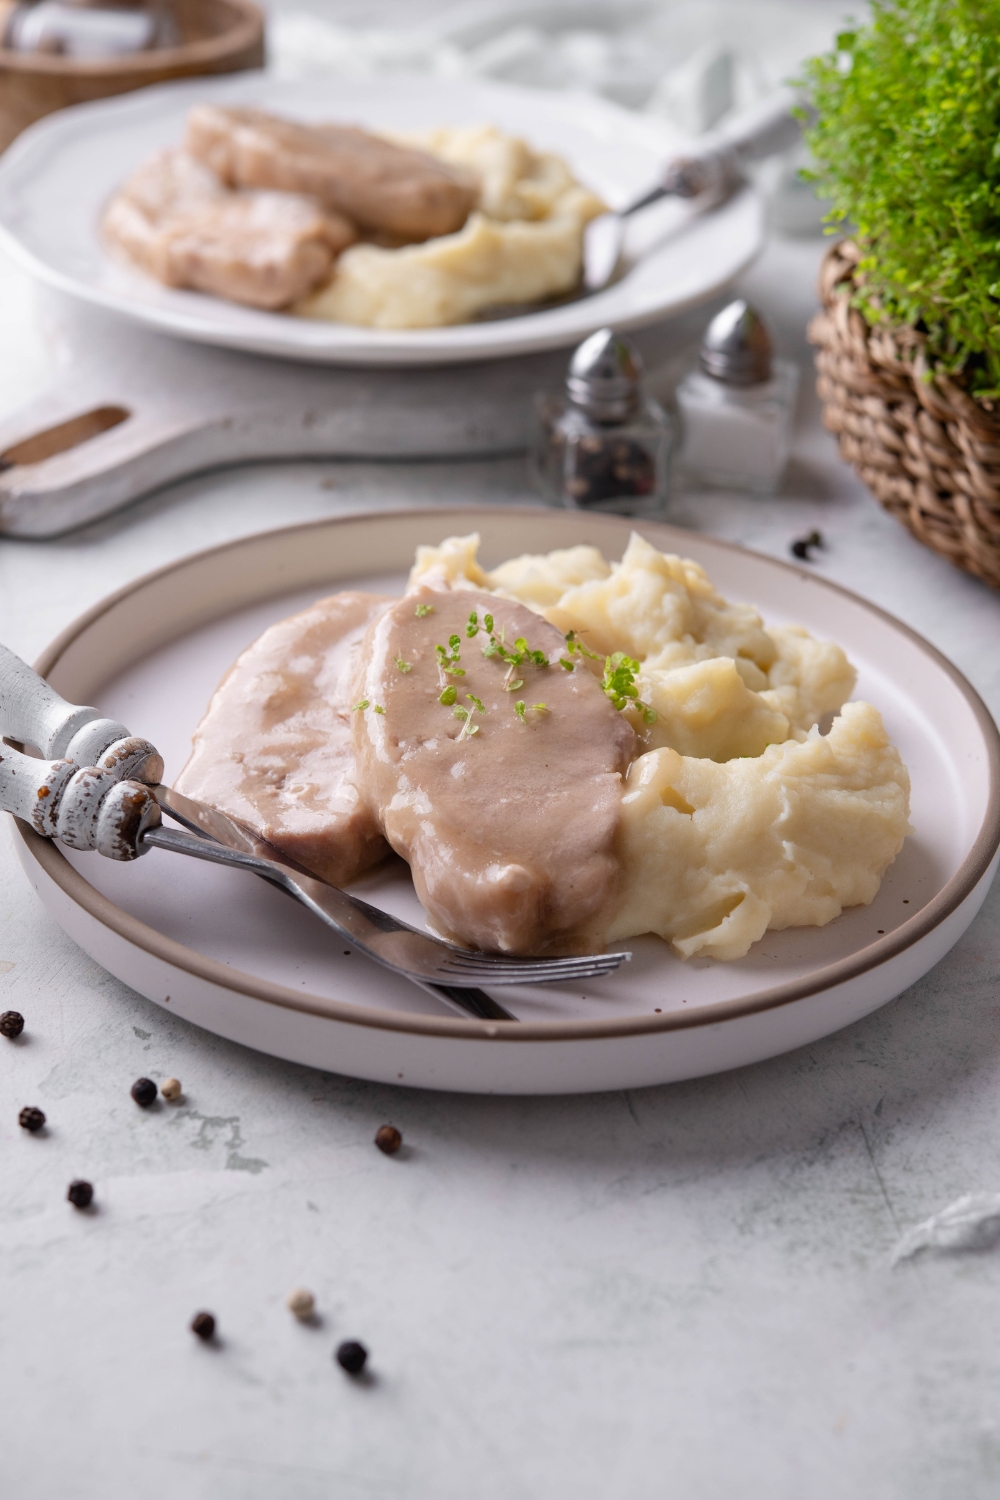 A white plate is piled high with crock pot pork chops with mushroom soup garnished with fresh herbs and mashed potatoes.